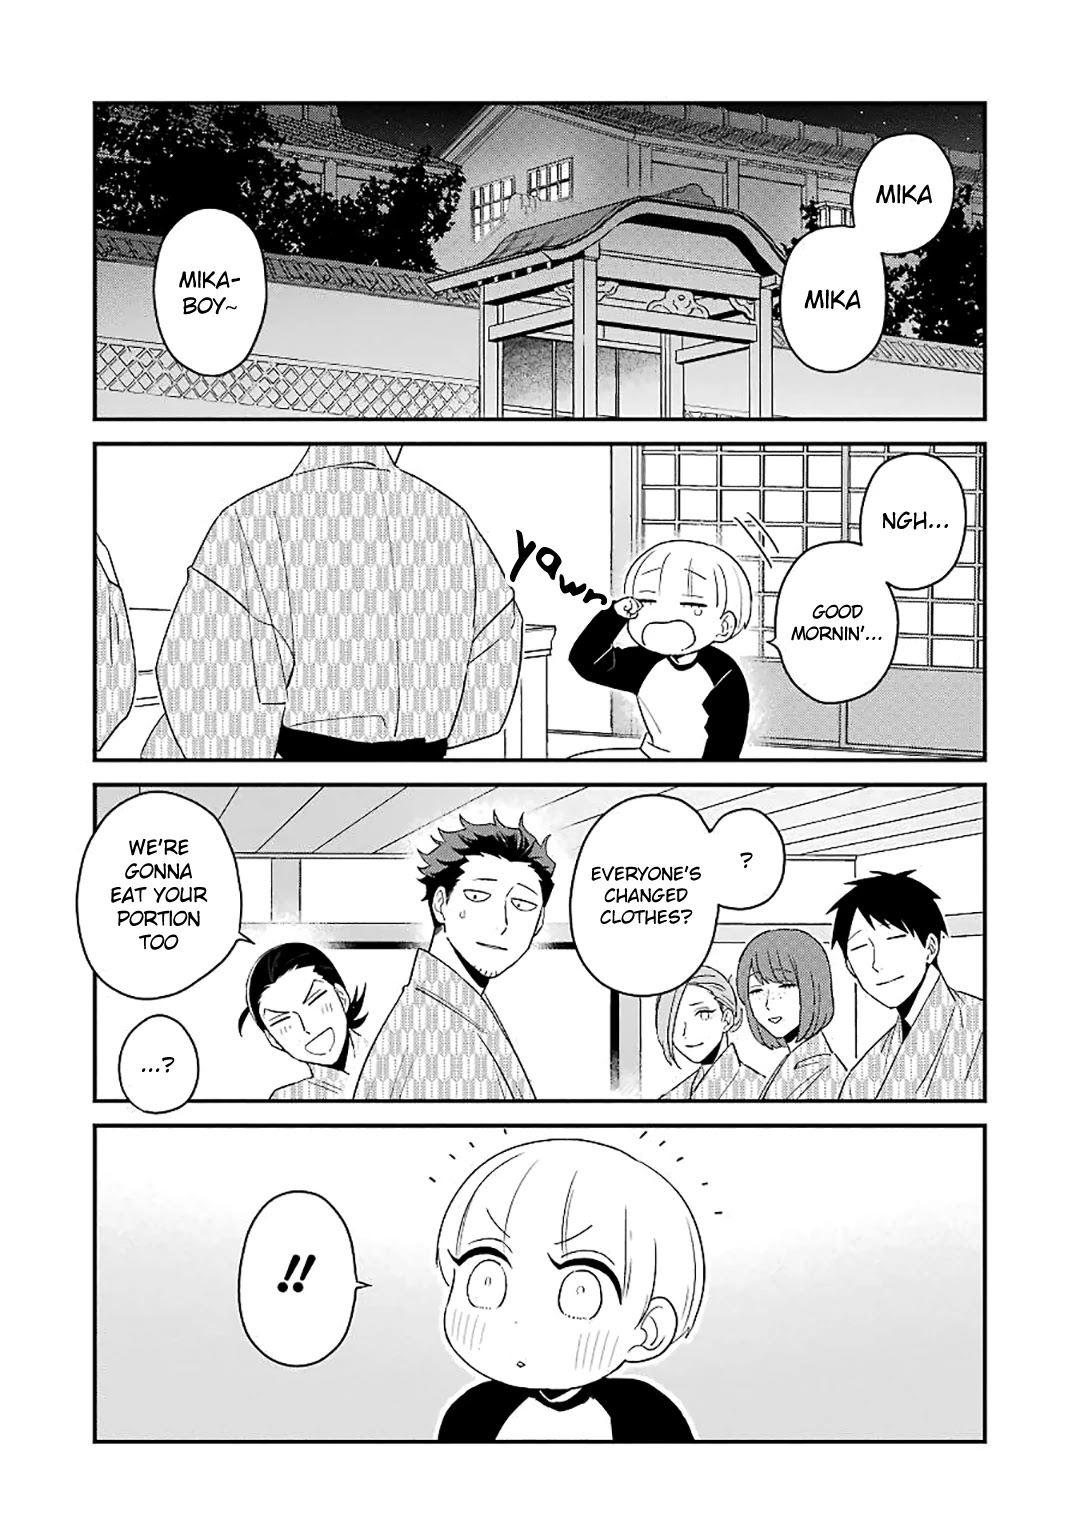 The Angel In Ootani-San's House - Page 2